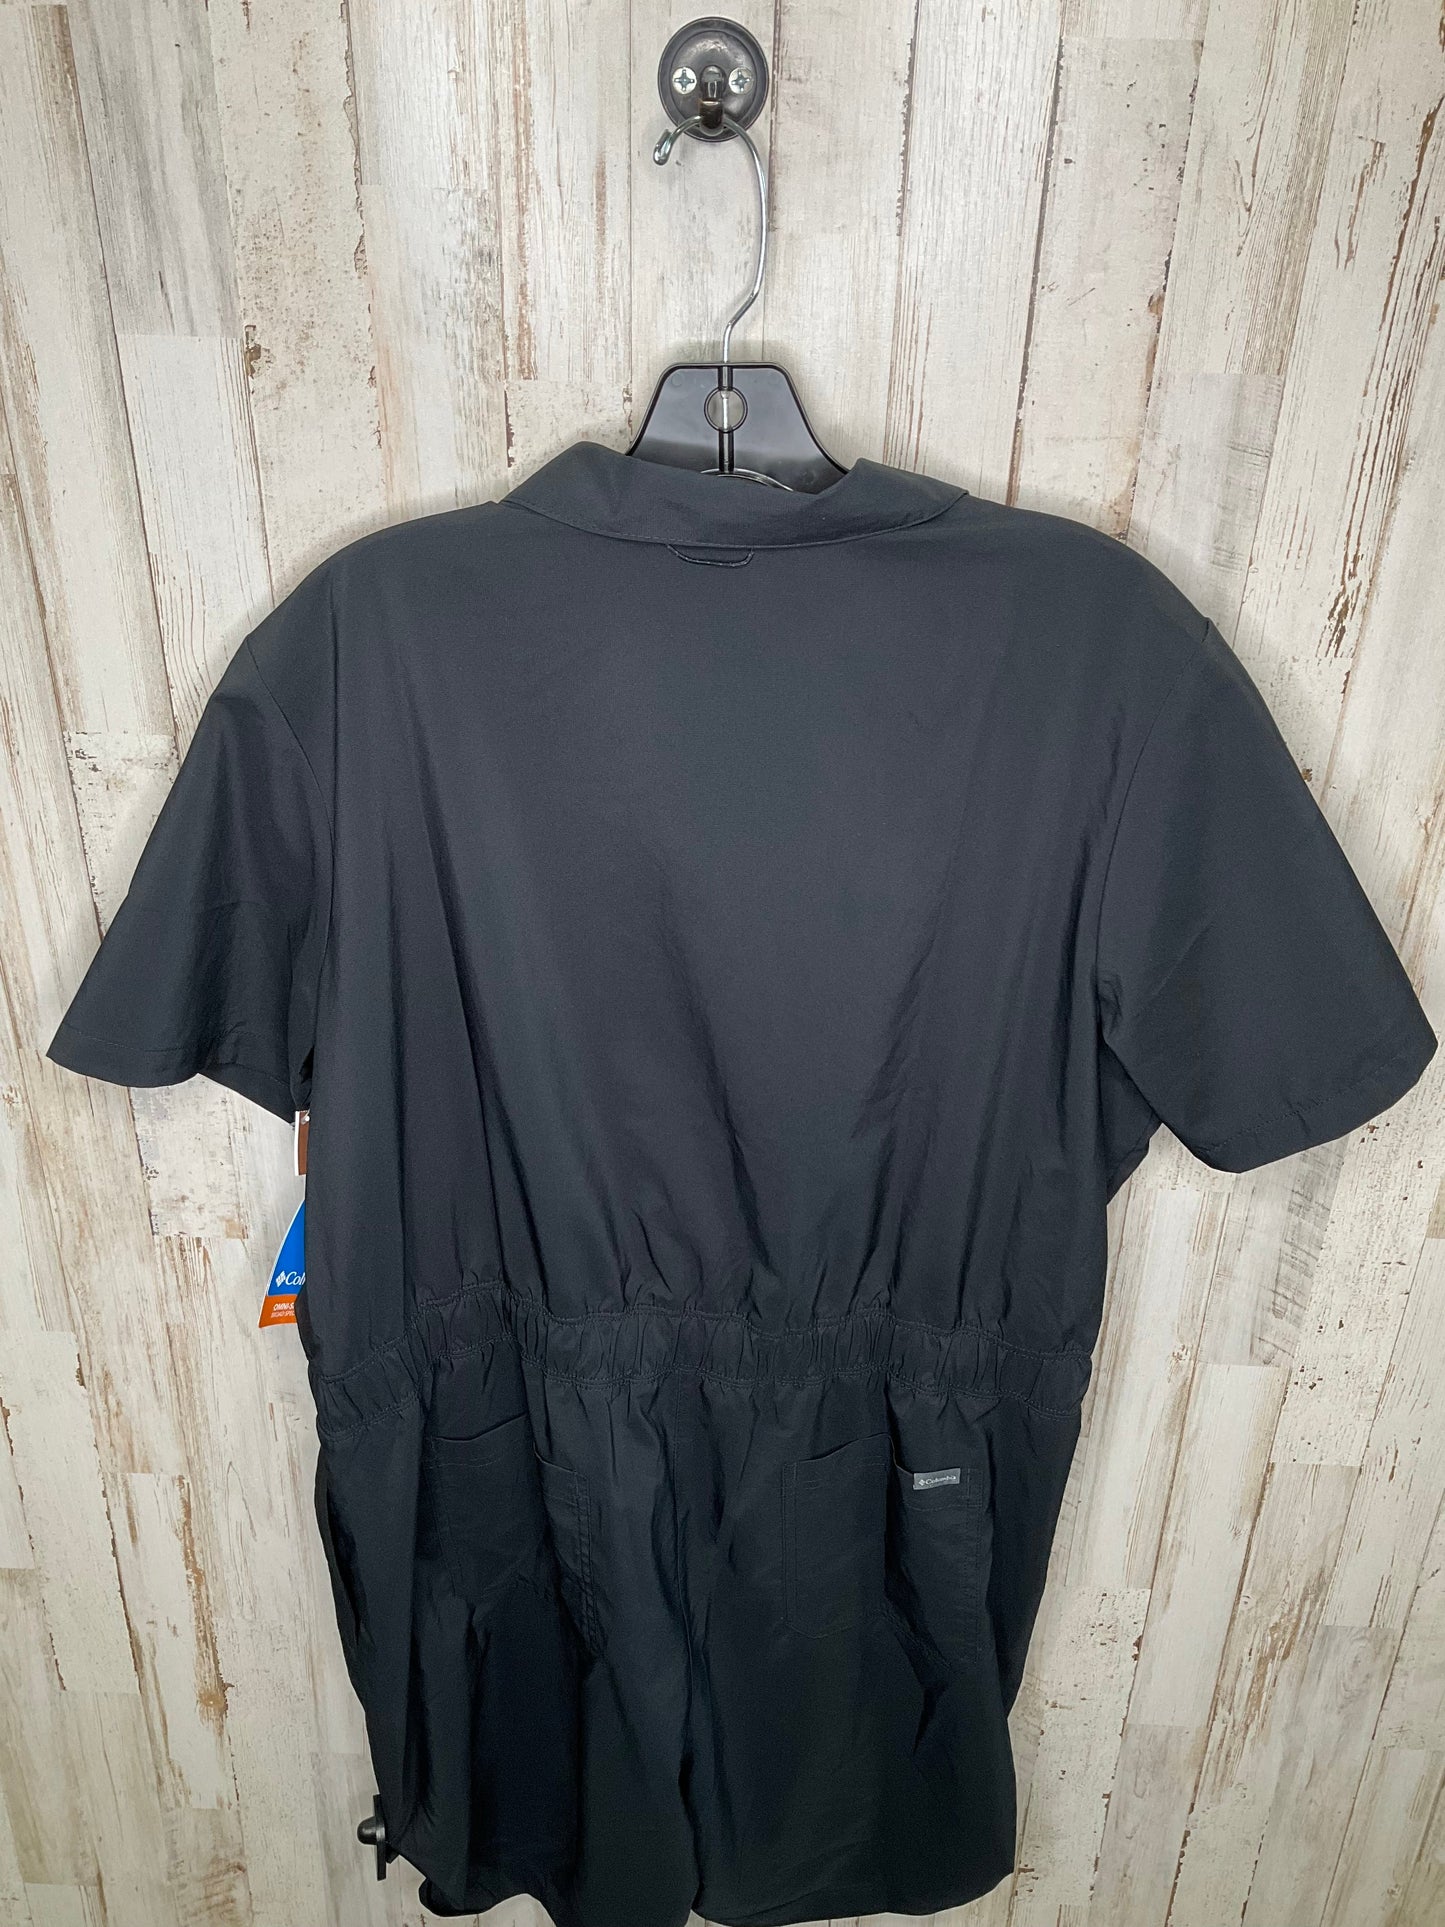 Athletic Dress By Columbia  Size: Xl